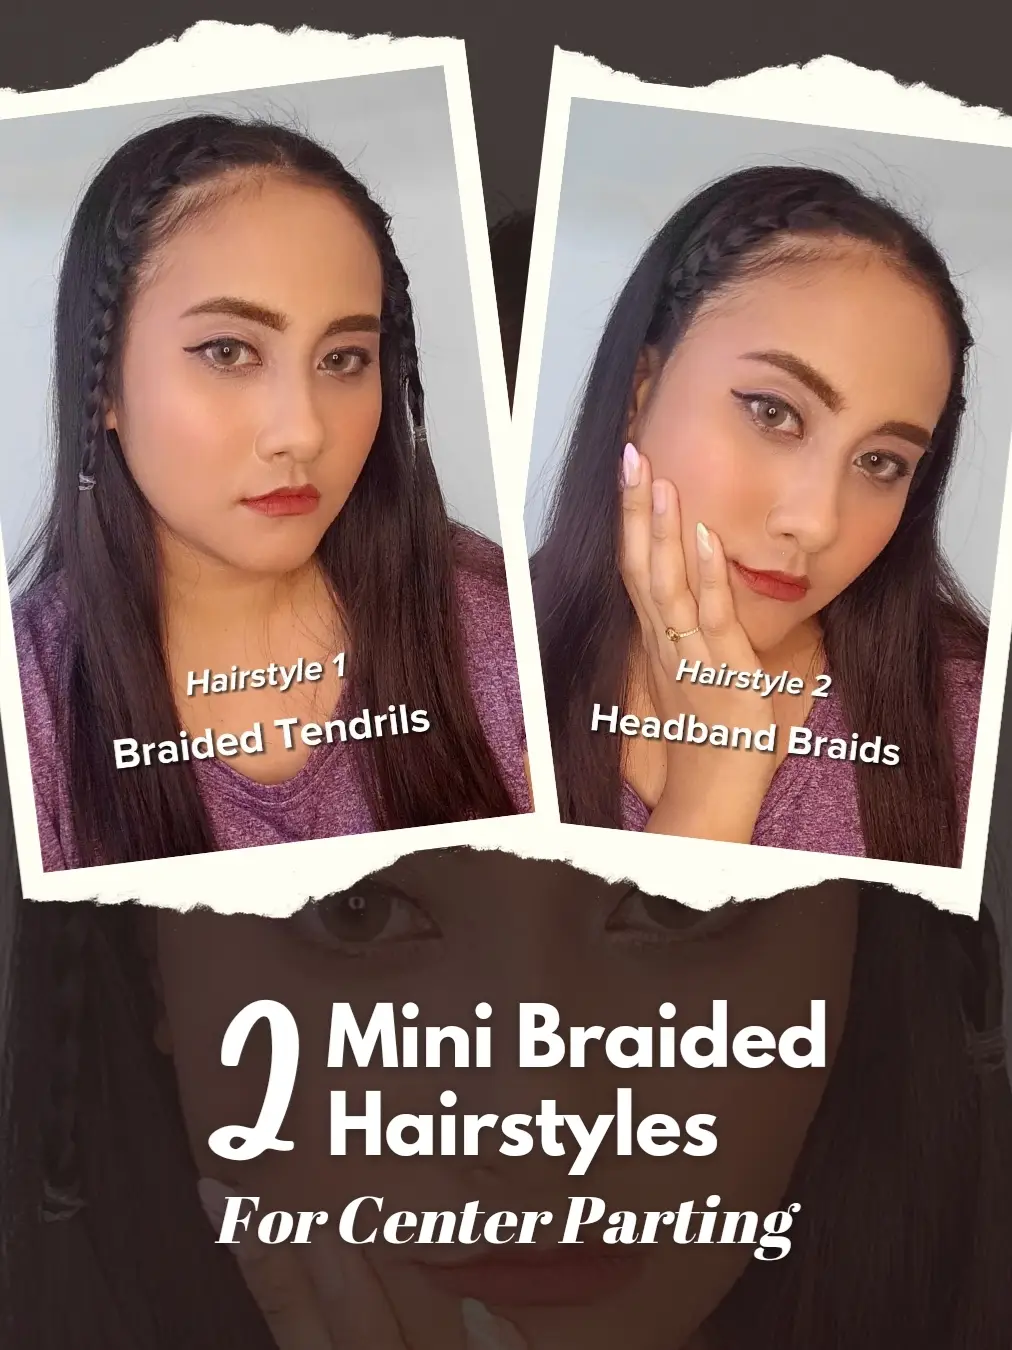 Tiny, Face-Framing Baby Braids Are Officially the Hairstyle of